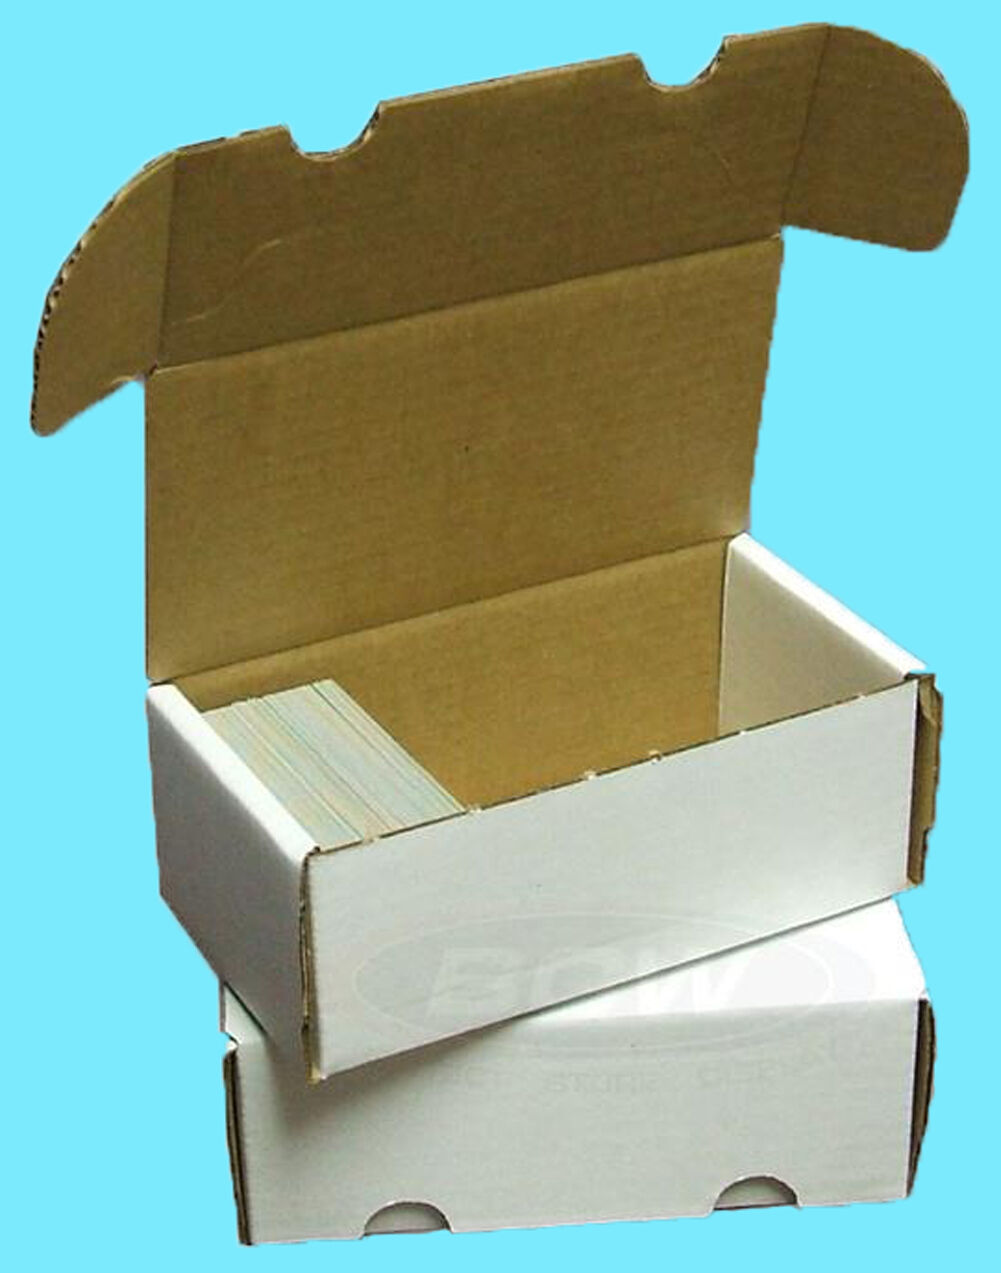 3 Bcw 400 Count Cardboard Storage Boxes Trading Sports Card Holder Case Baseball